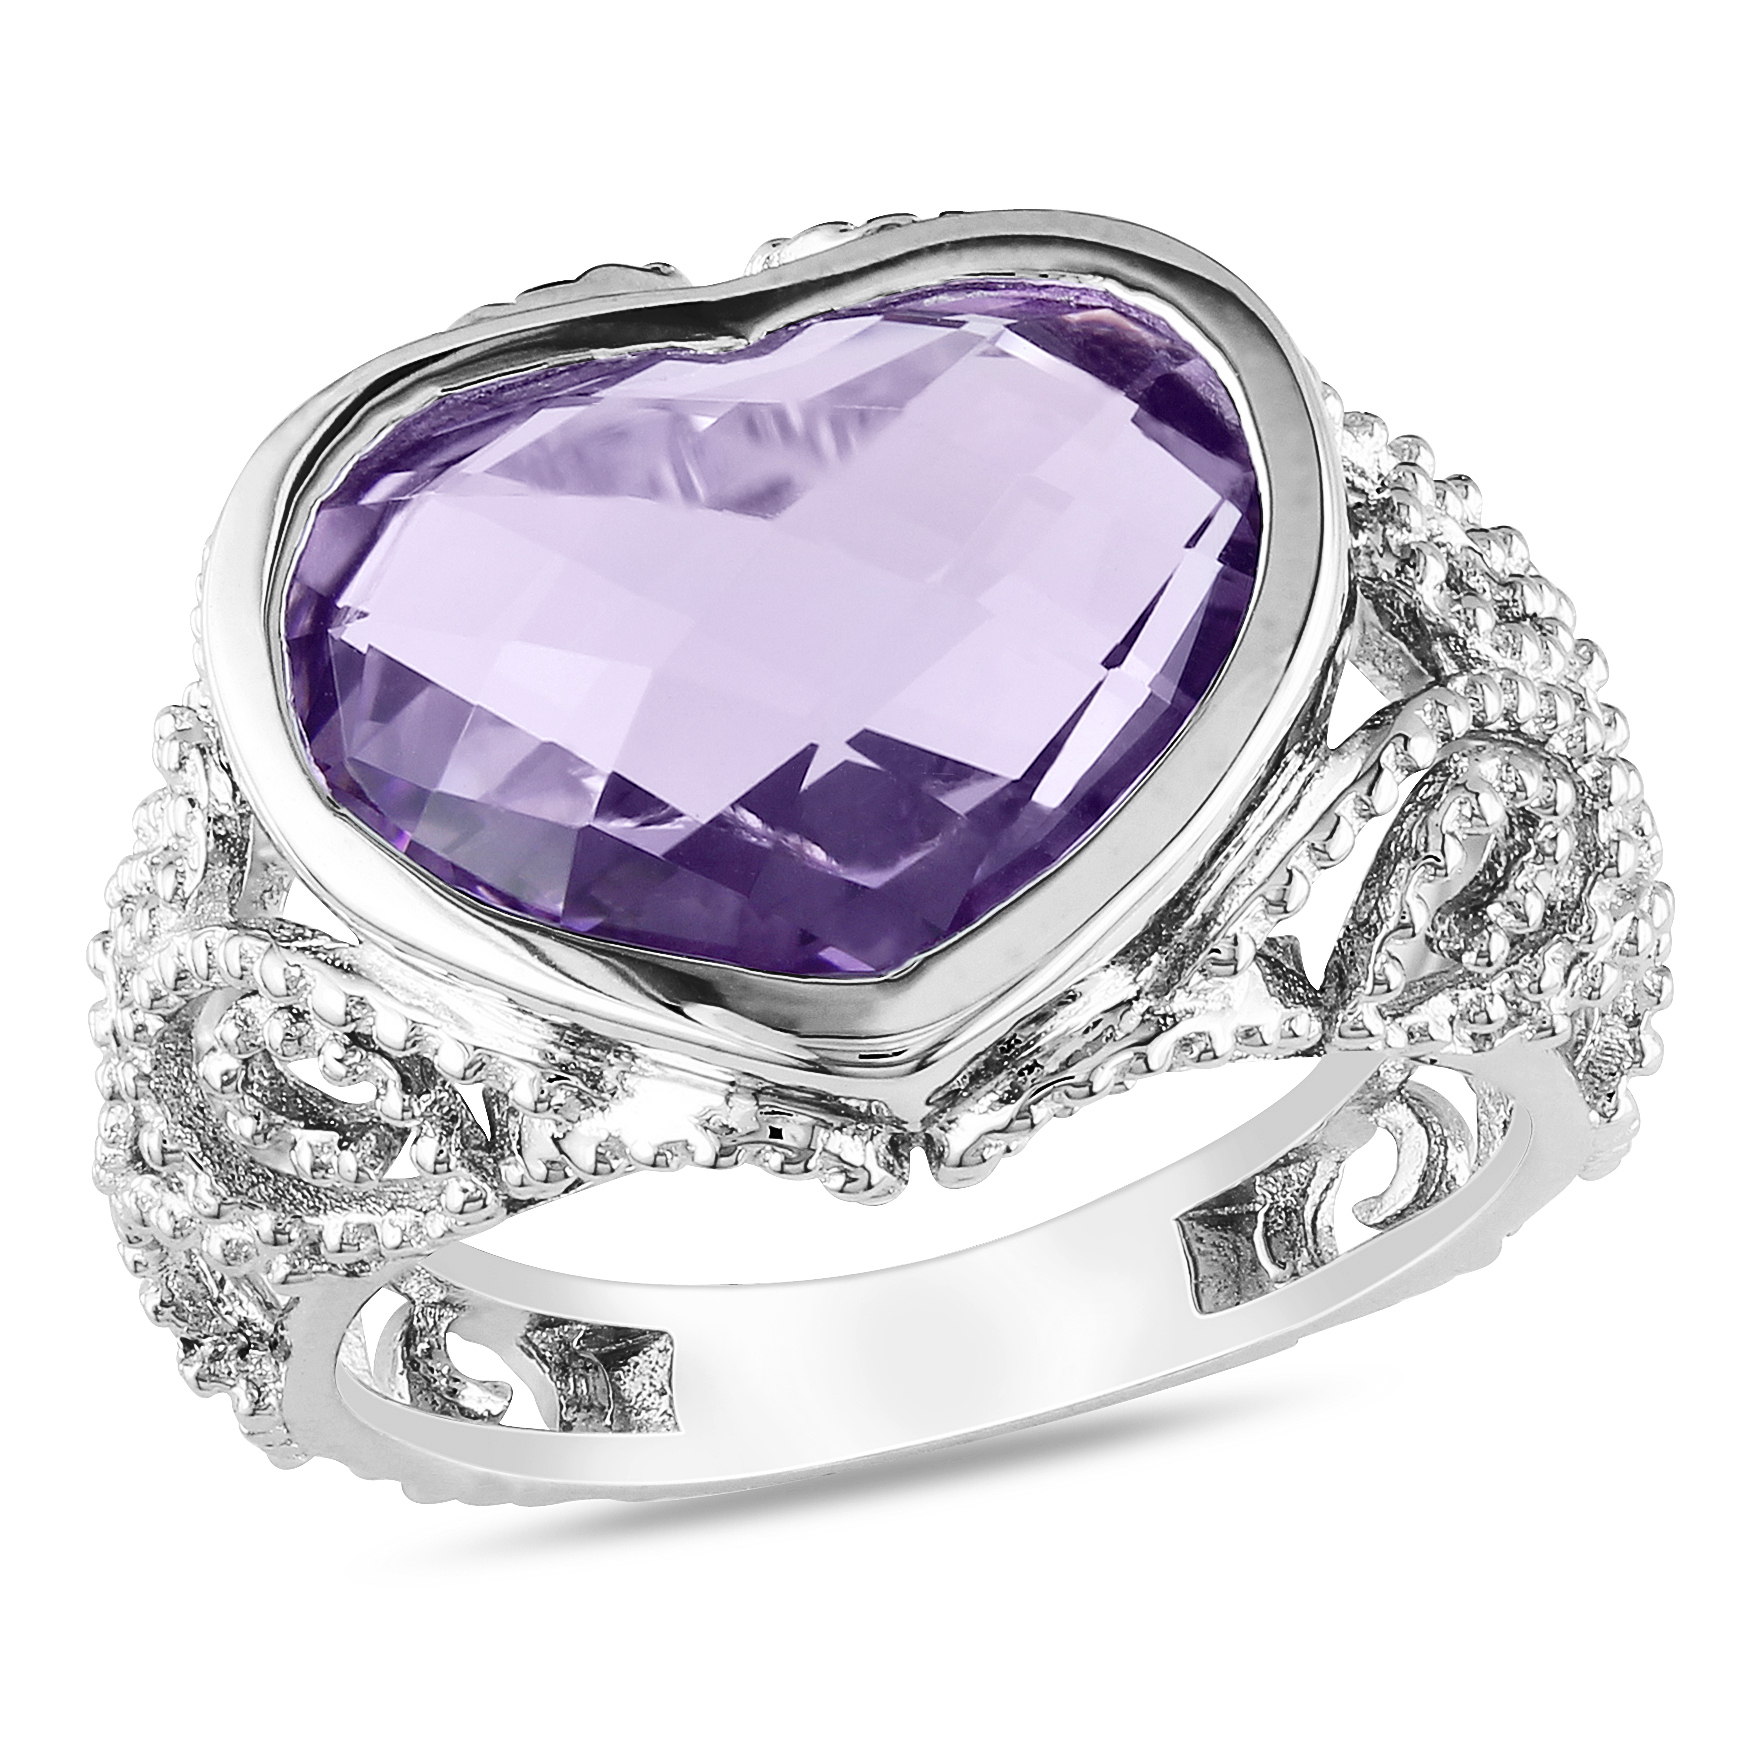 Amour 6 Carat T.G.W. Amethyst Fashion Ring in Sterling Silver